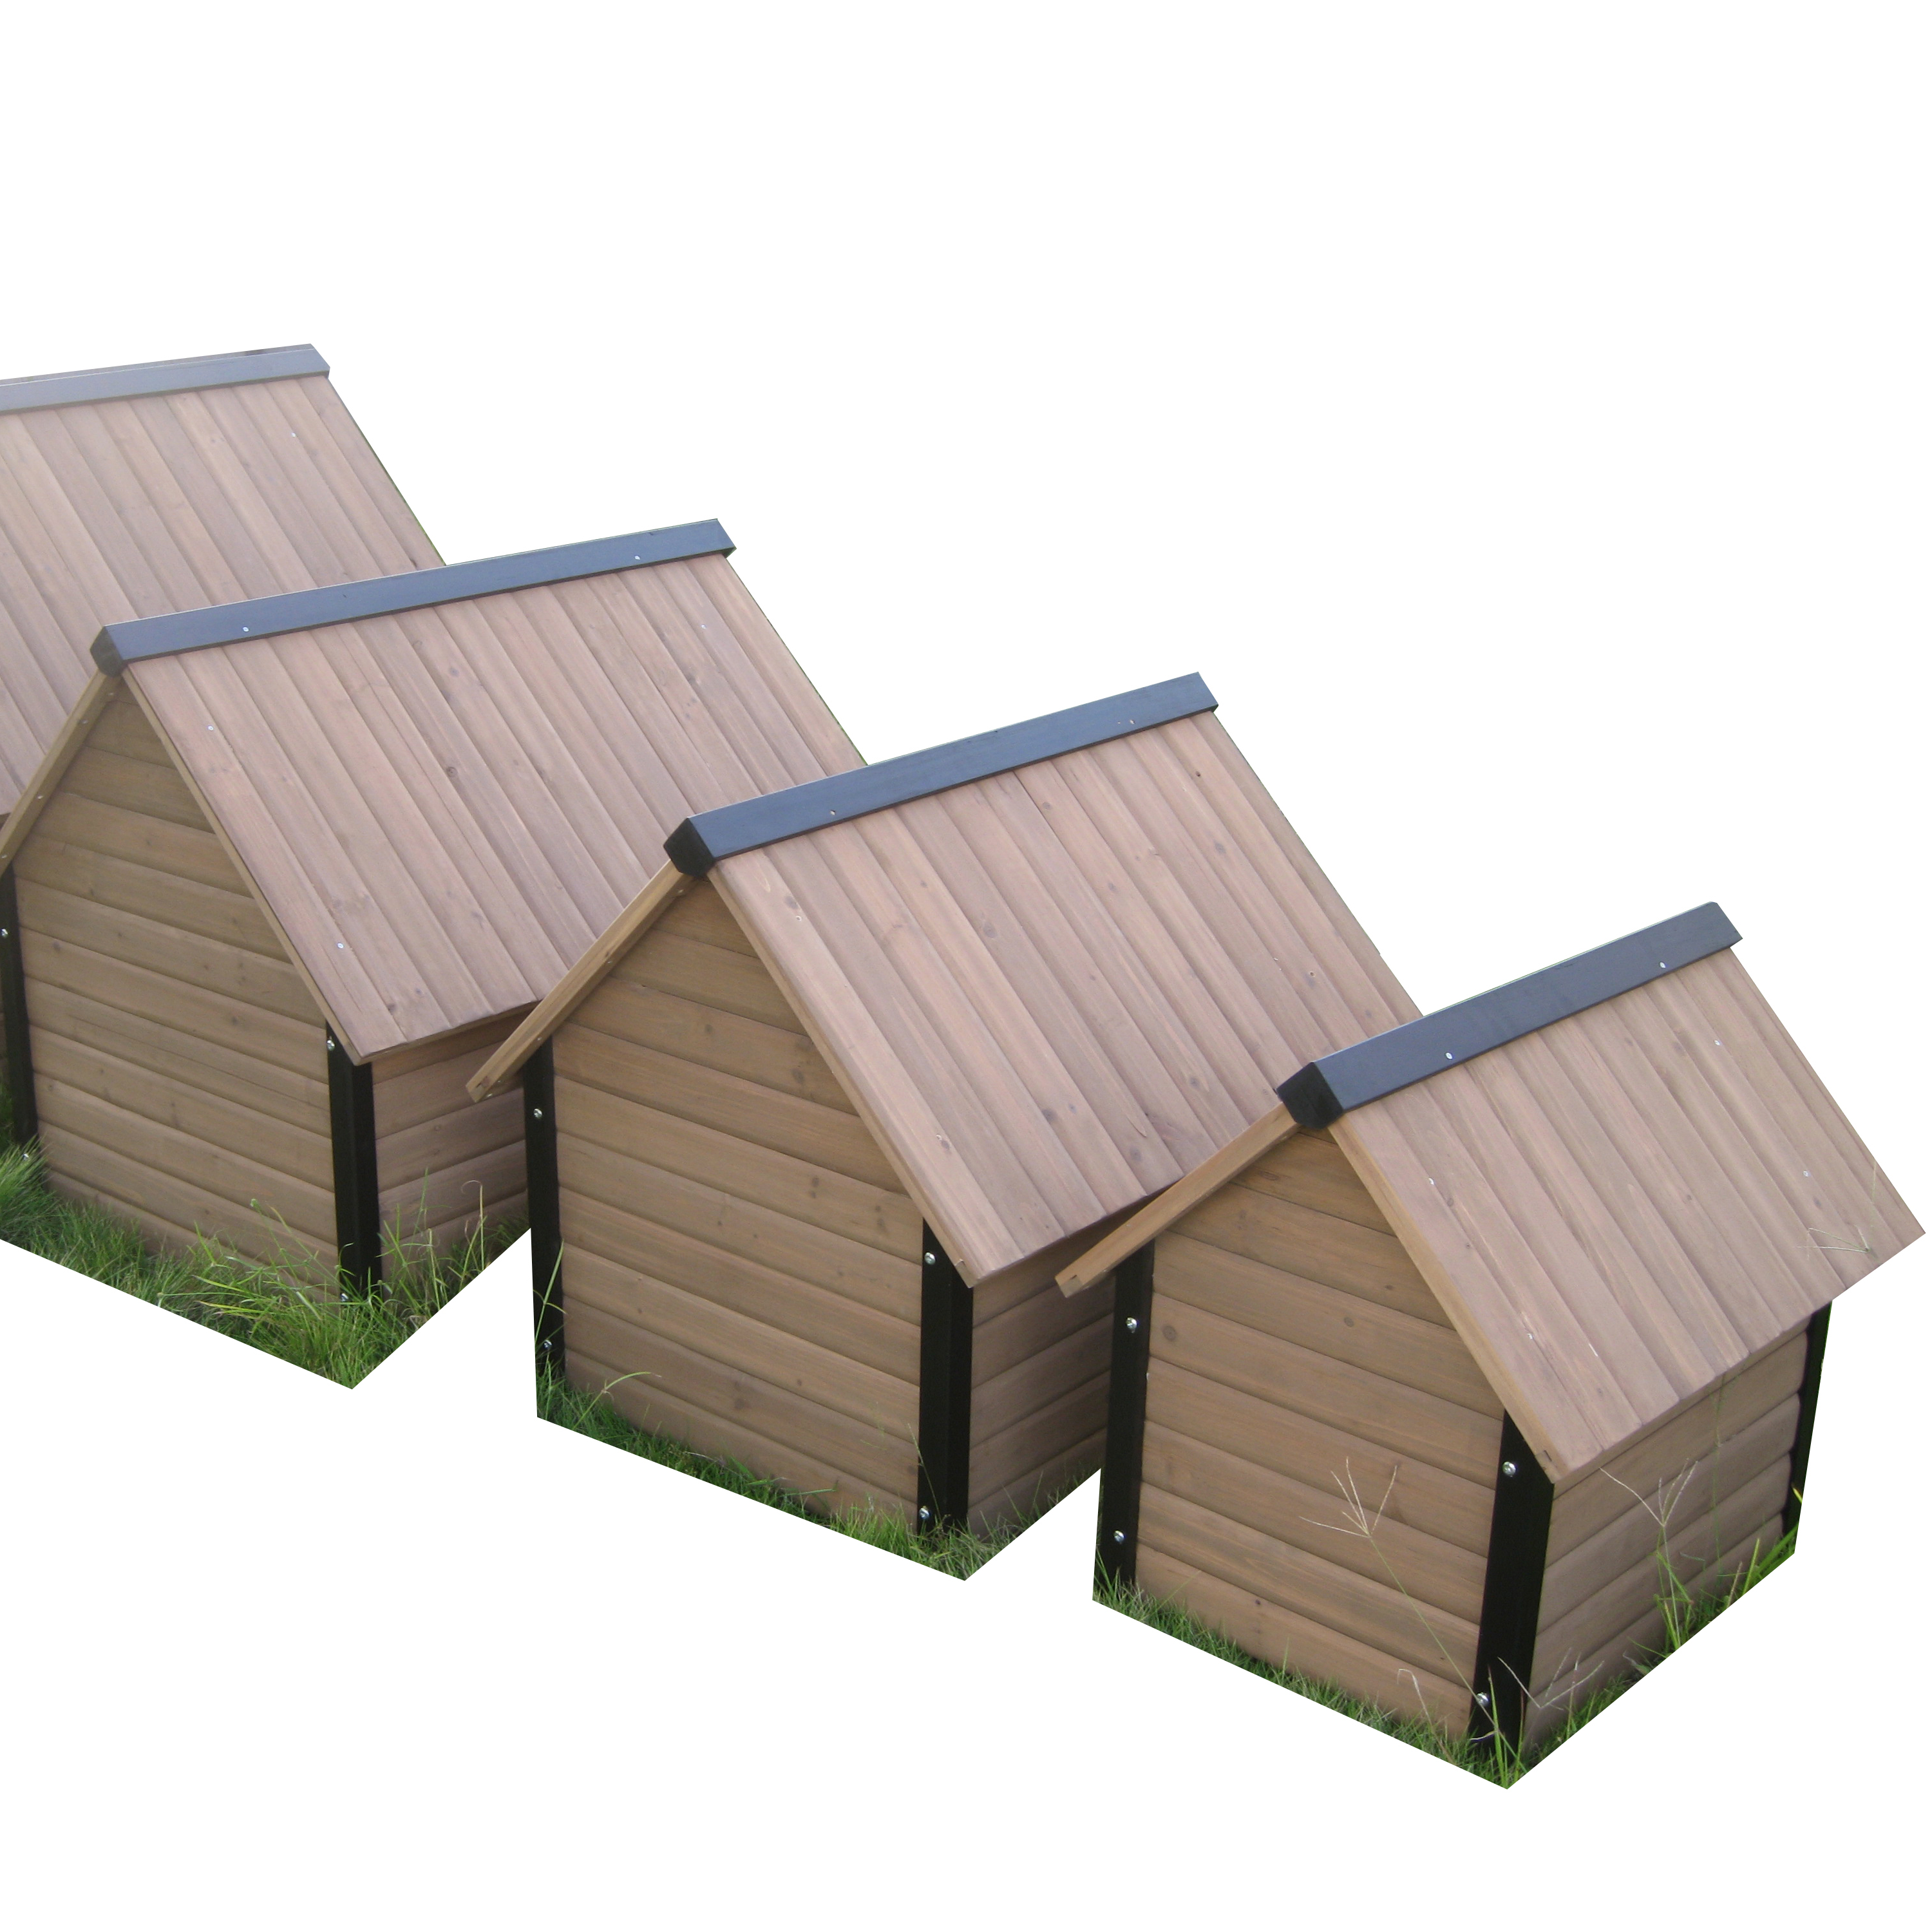 Roof Fence Panel Wooden Outdoor Cat Small cheap pink dog houses pet crate